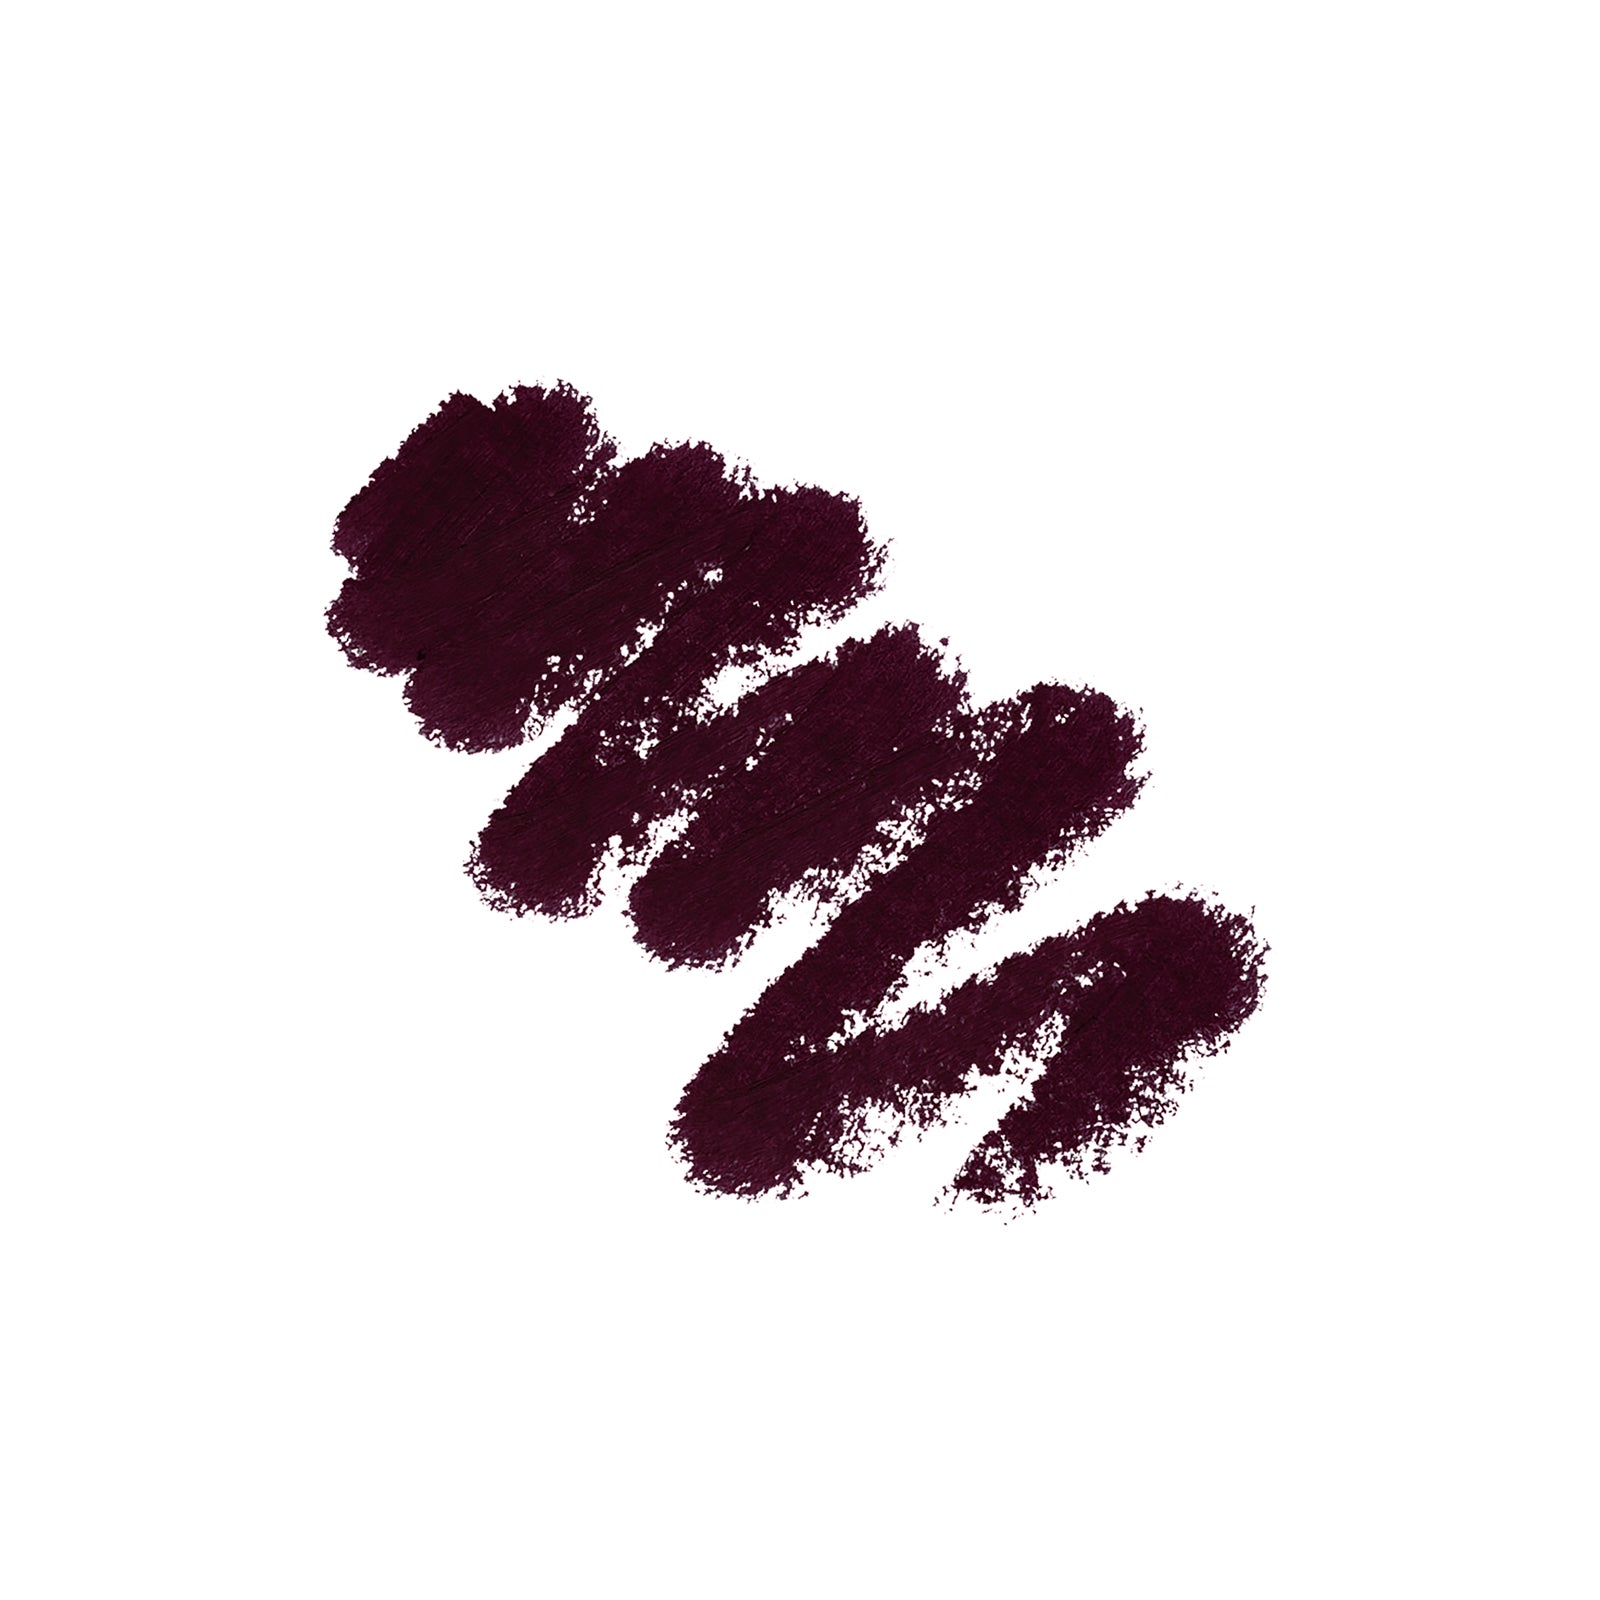 Afterparty Matte Lips (008, All-Nighter)